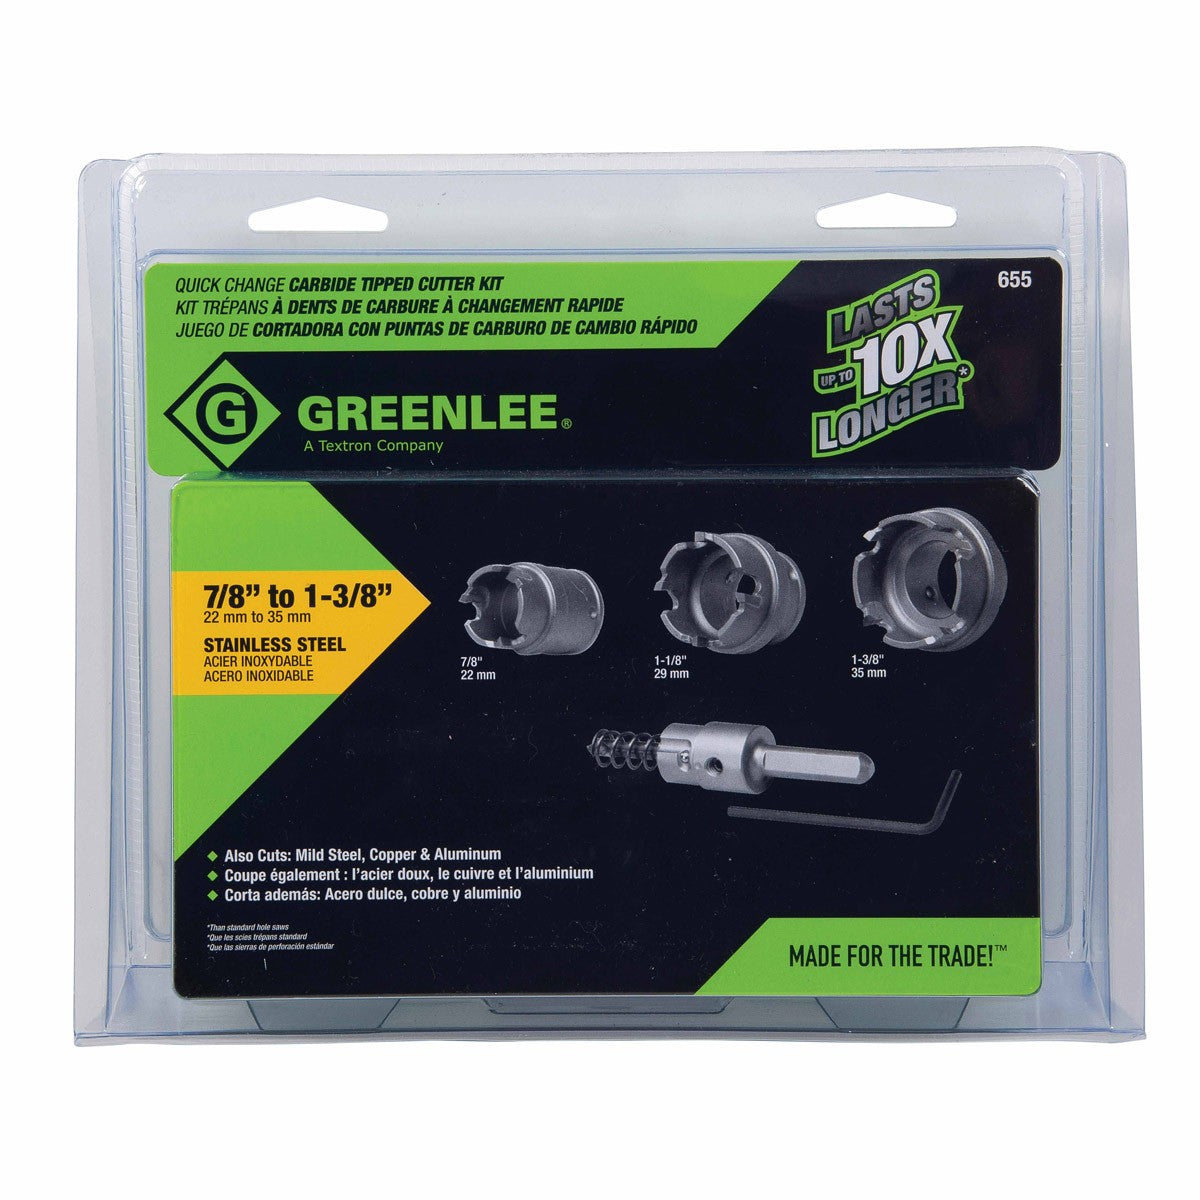 Greenlee 655 Quick Change Stainless Steel Hole Cutter Kit (7/8", 1-1/8", 1-3/8")